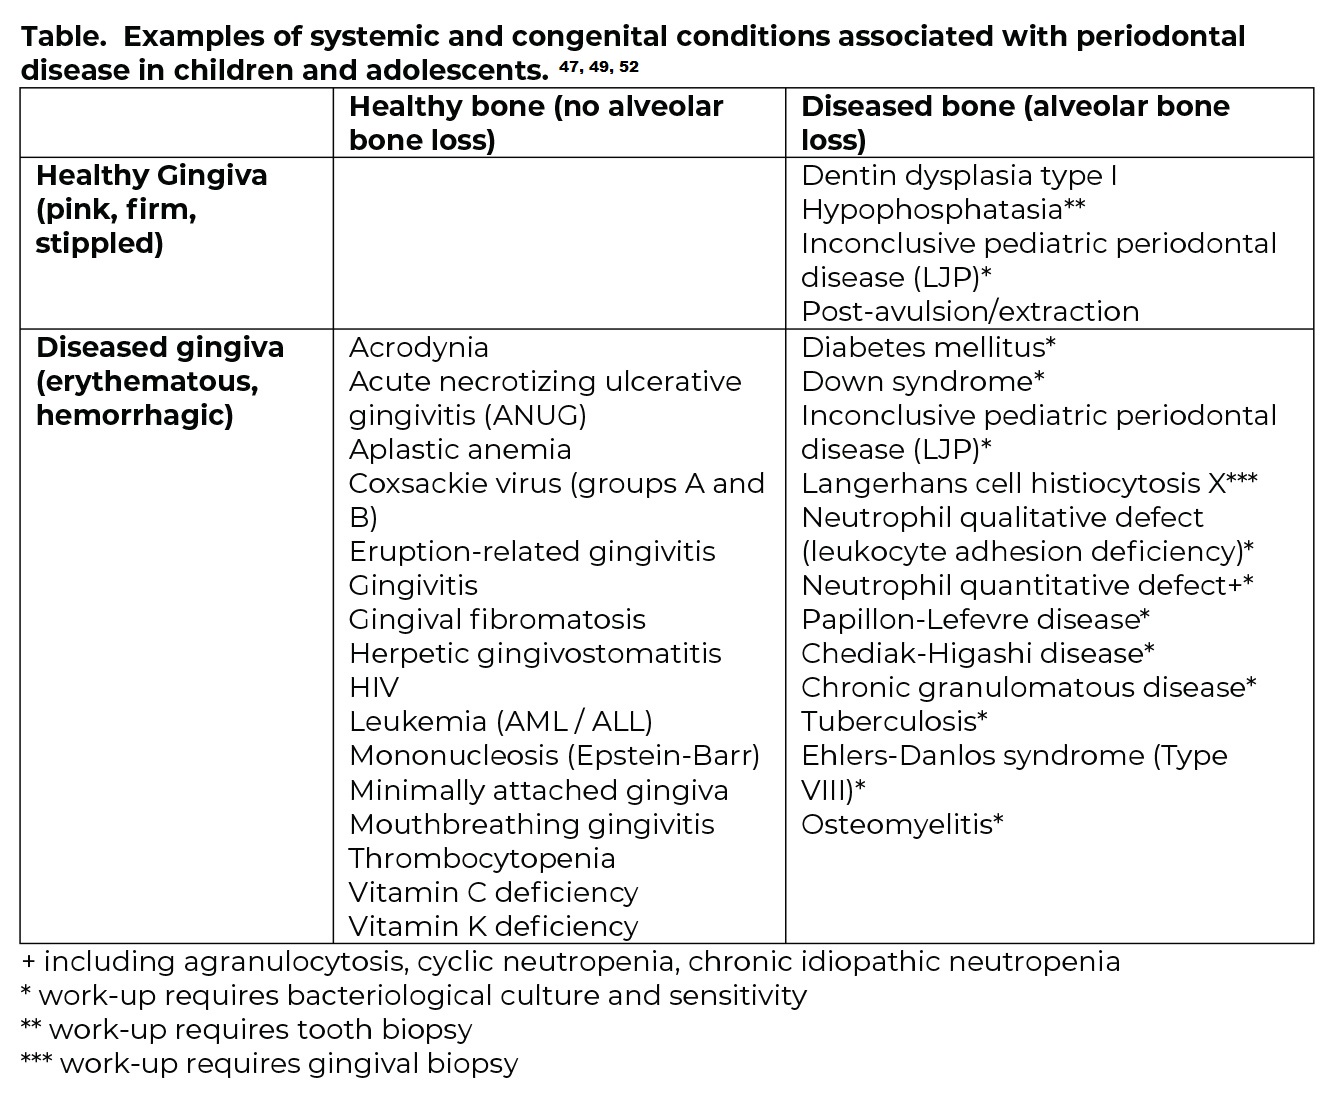 An image of Table. Examples of systemic and congenital conditions associated with periodontal disease in children and adolescents.